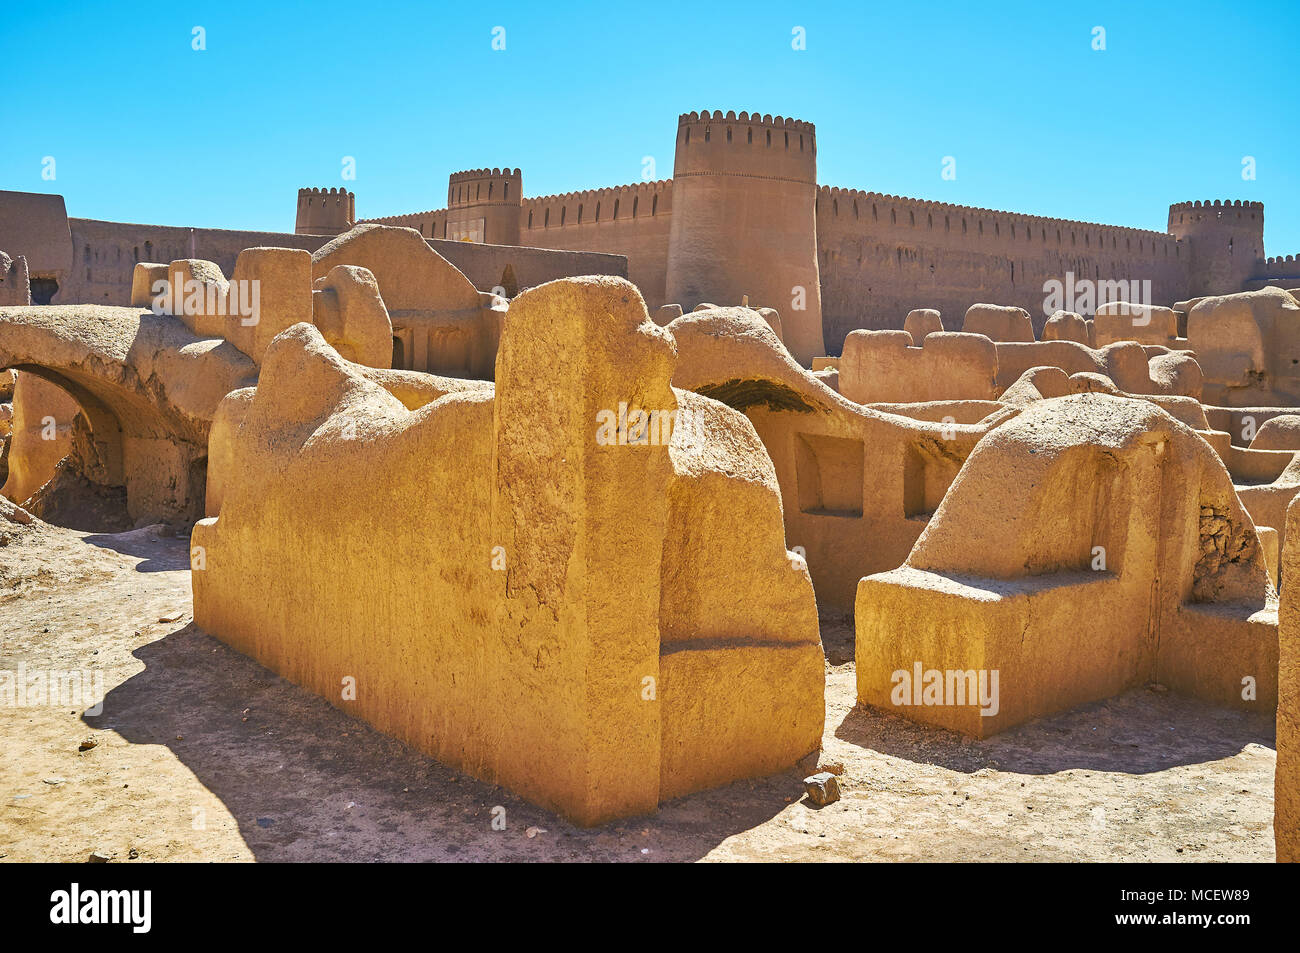 Preserved foundations and walls of ancient adbe buildings of Arg-e Rayen with massive ramparts and towers of castle on the background, Iran. Stock Photo